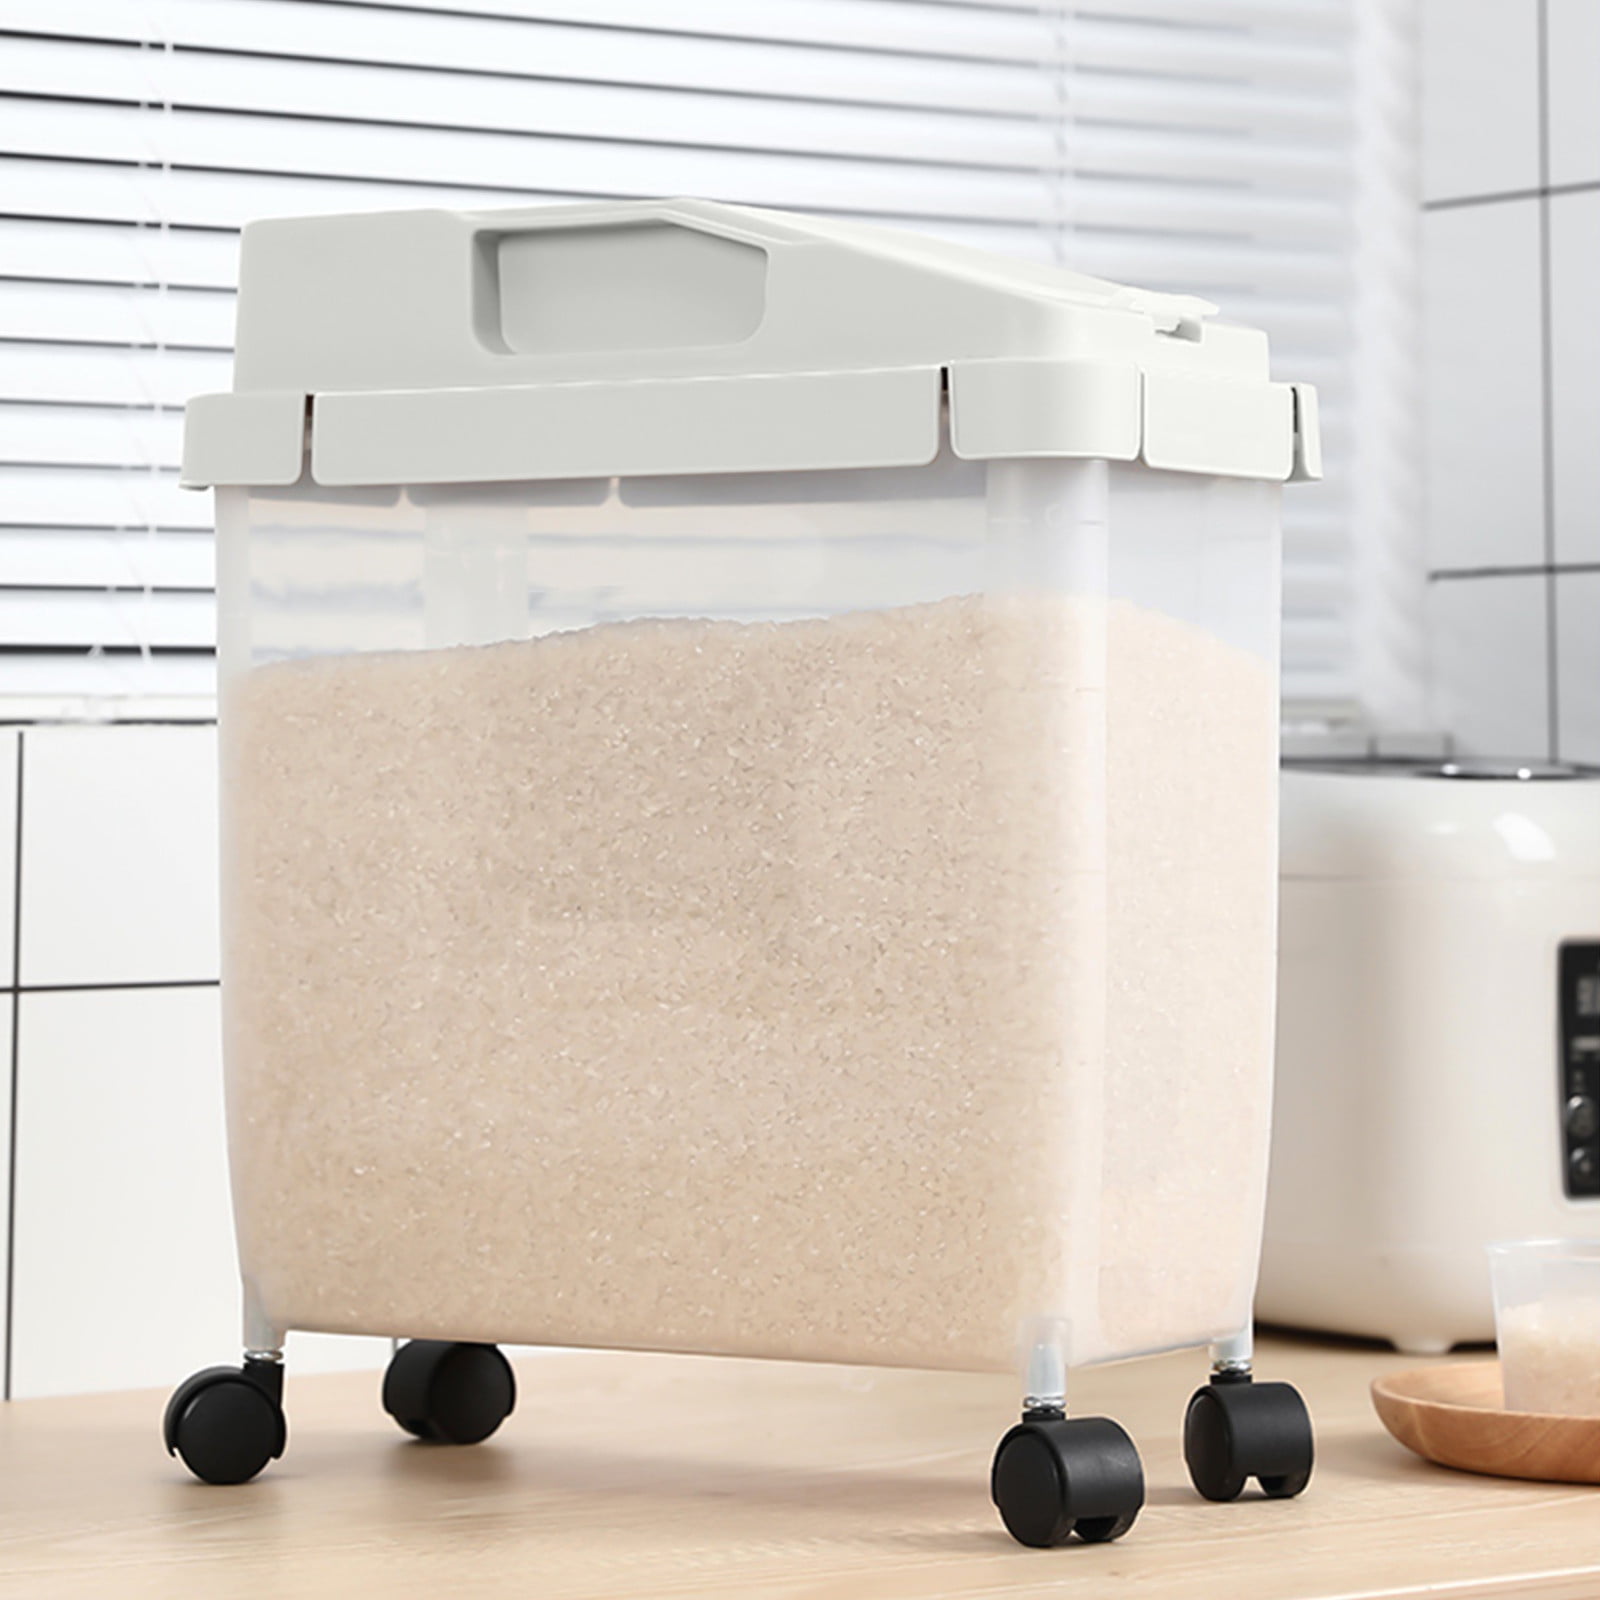 Large Airtight Rice Storage Container with Cup - White